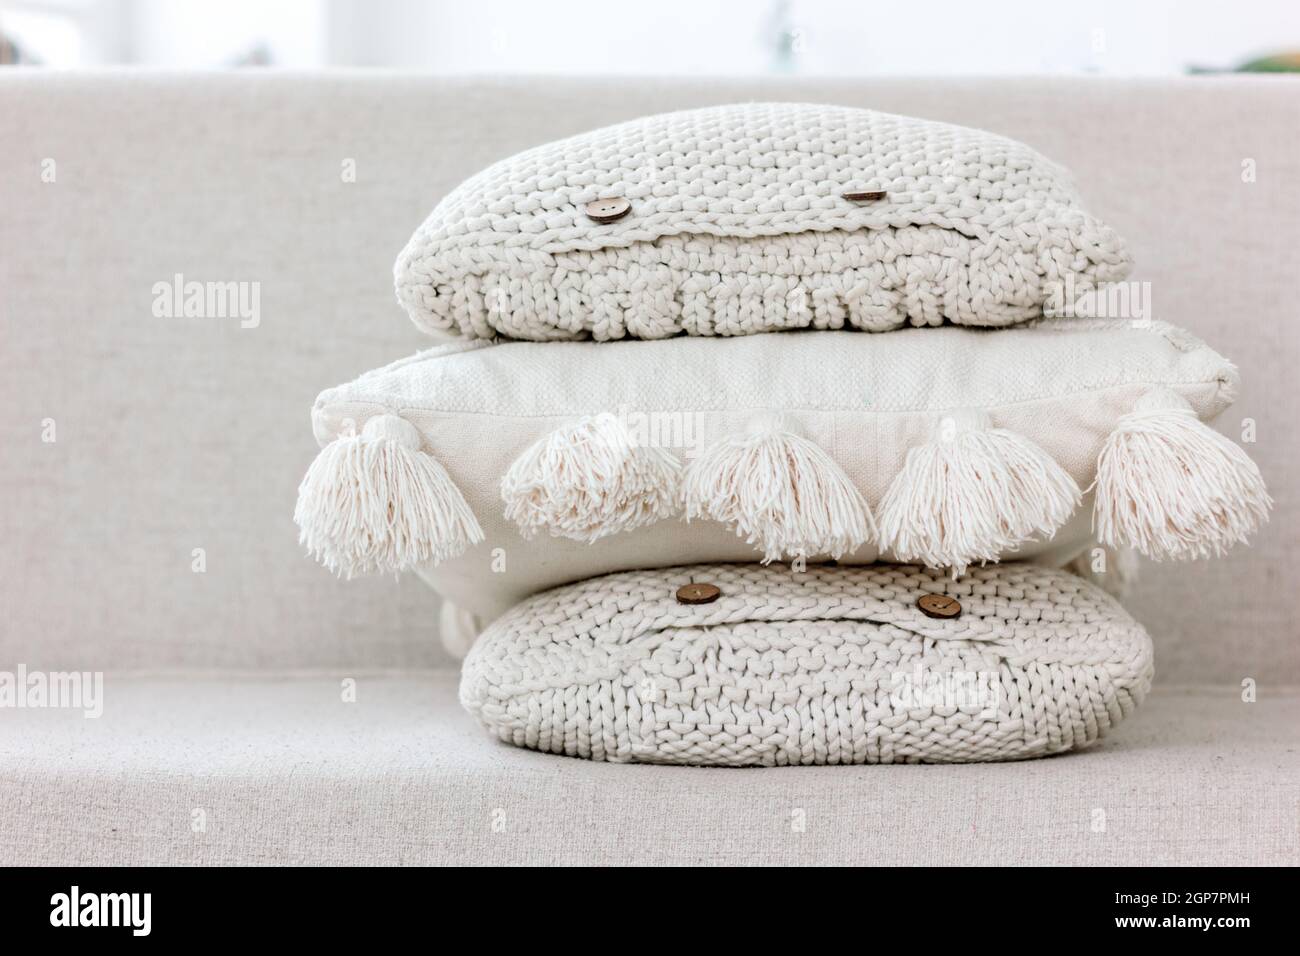 A pile of white and beige knitted sofa pillows with buttons and cotton tassels. Cozy textile textures, interior hygge and home handmade design concept Stock Photo